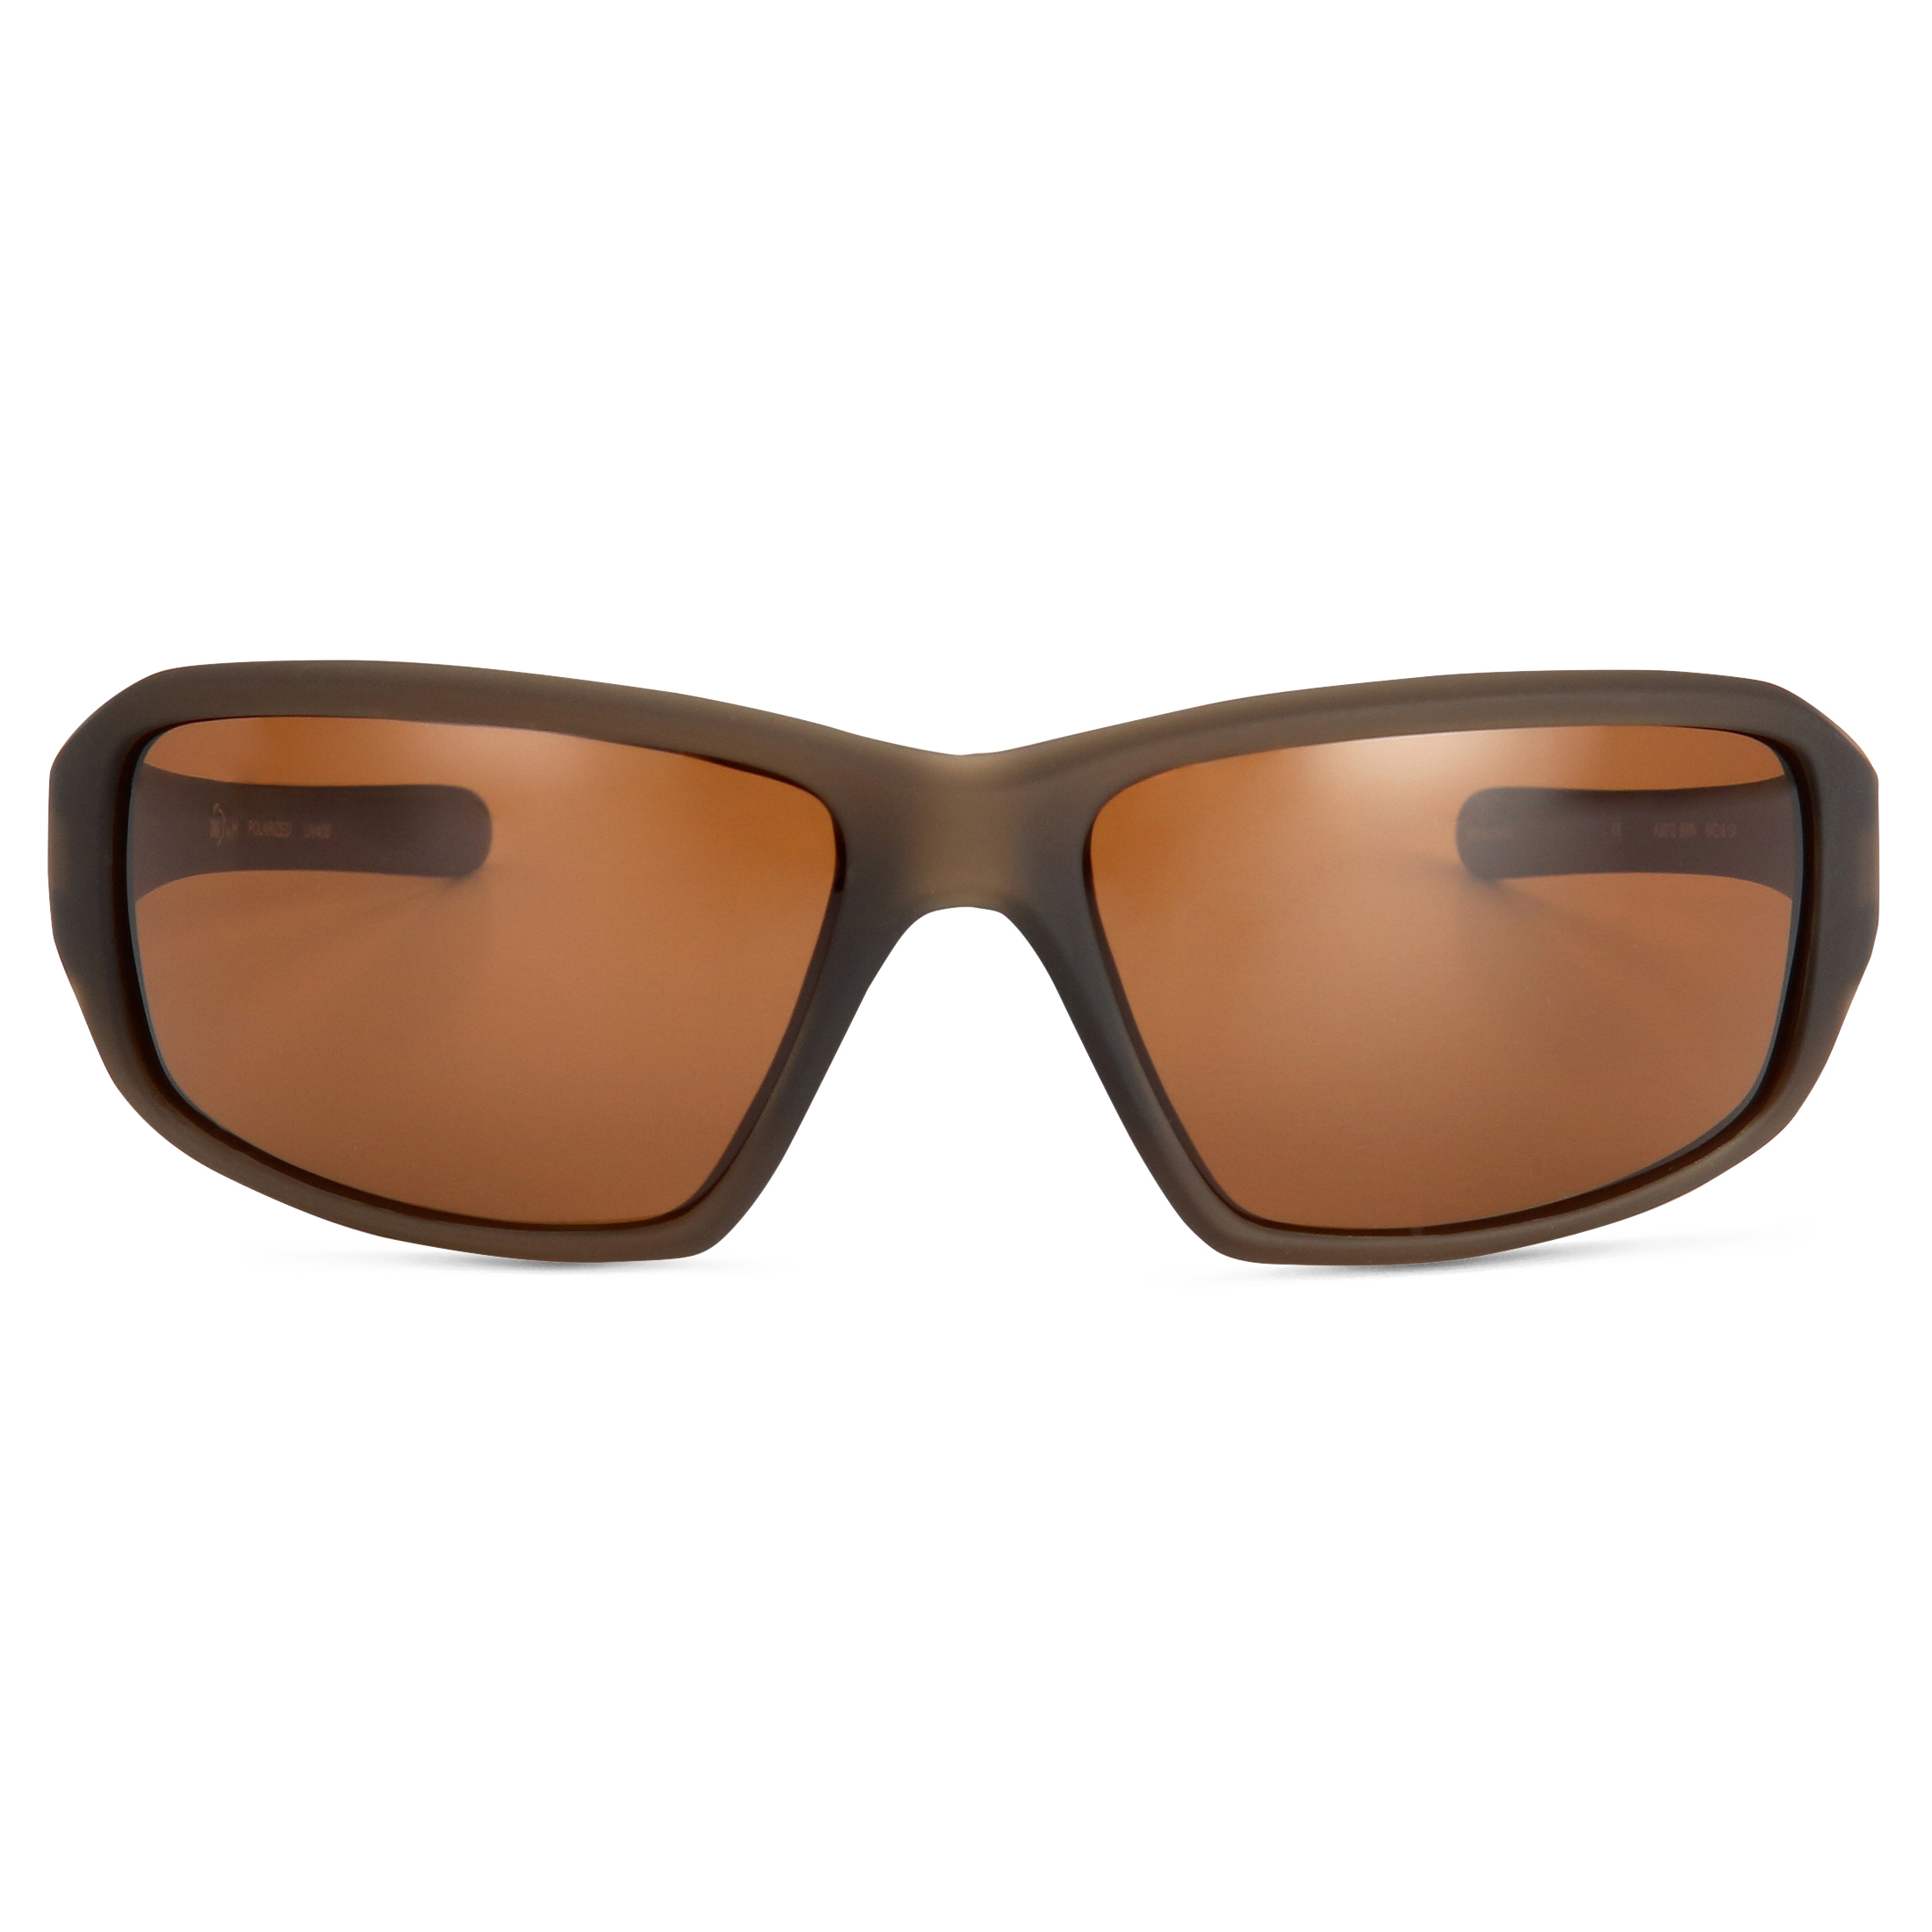 DNA Polarized Sunglasses, Unisex, A3012, Brown, 64-18-134 - image 1 of 6